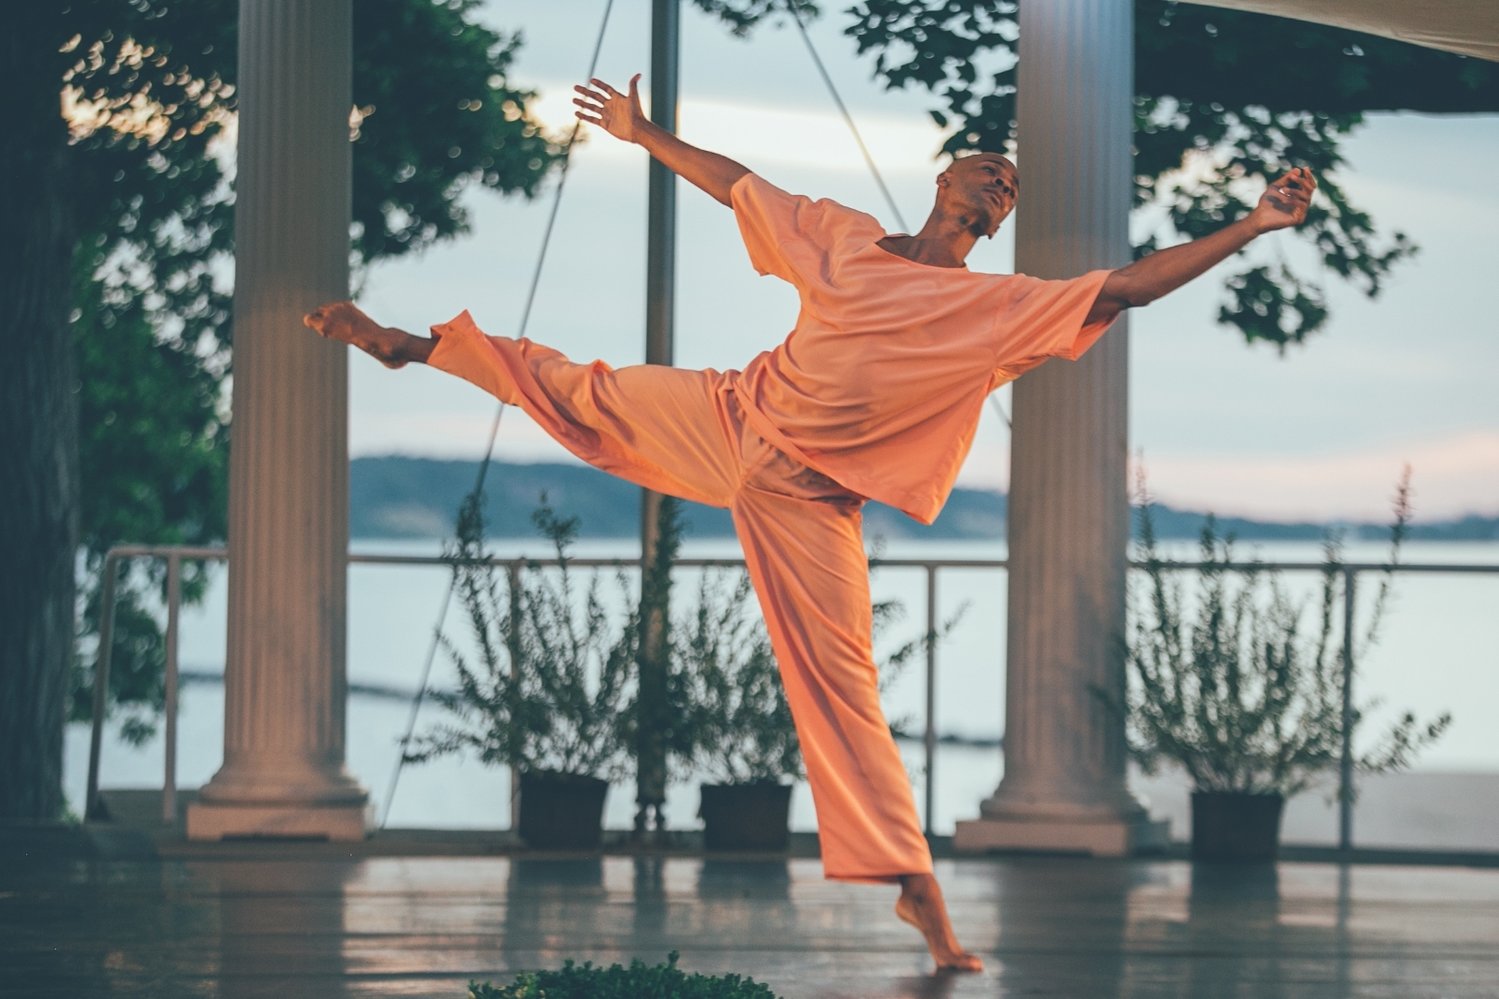 The Gold Coast Dance Festival included performances by well-known Manhattan dance companies including Alvin Ailey. Yannick Lebrun who performed on Saturday is a member.